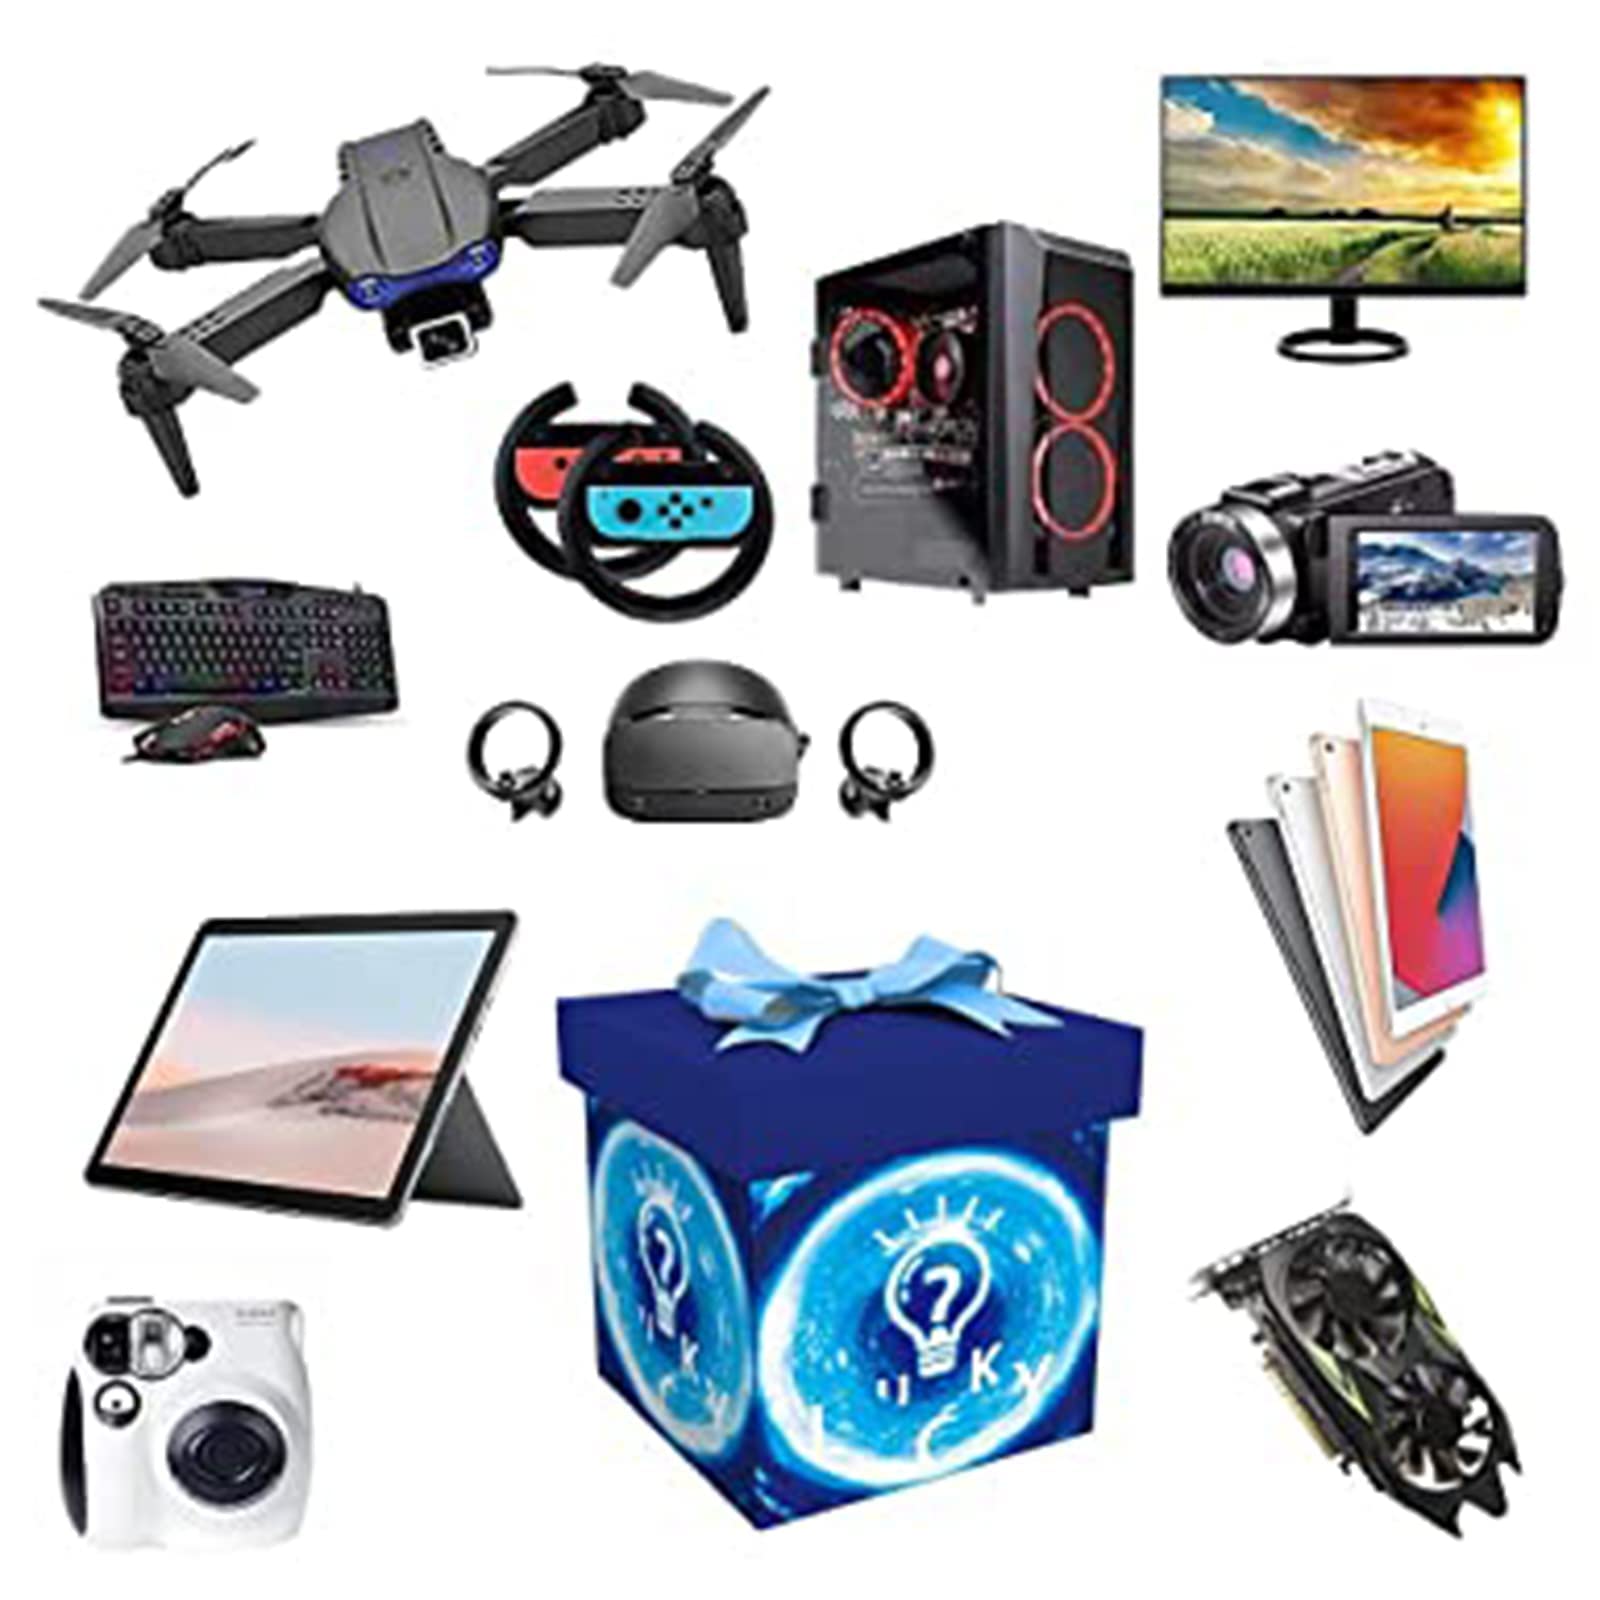 Lucky Holiday Gift Surprise Electronic Product Suit, Choose A Set Gift Box to Give to Family or Friends